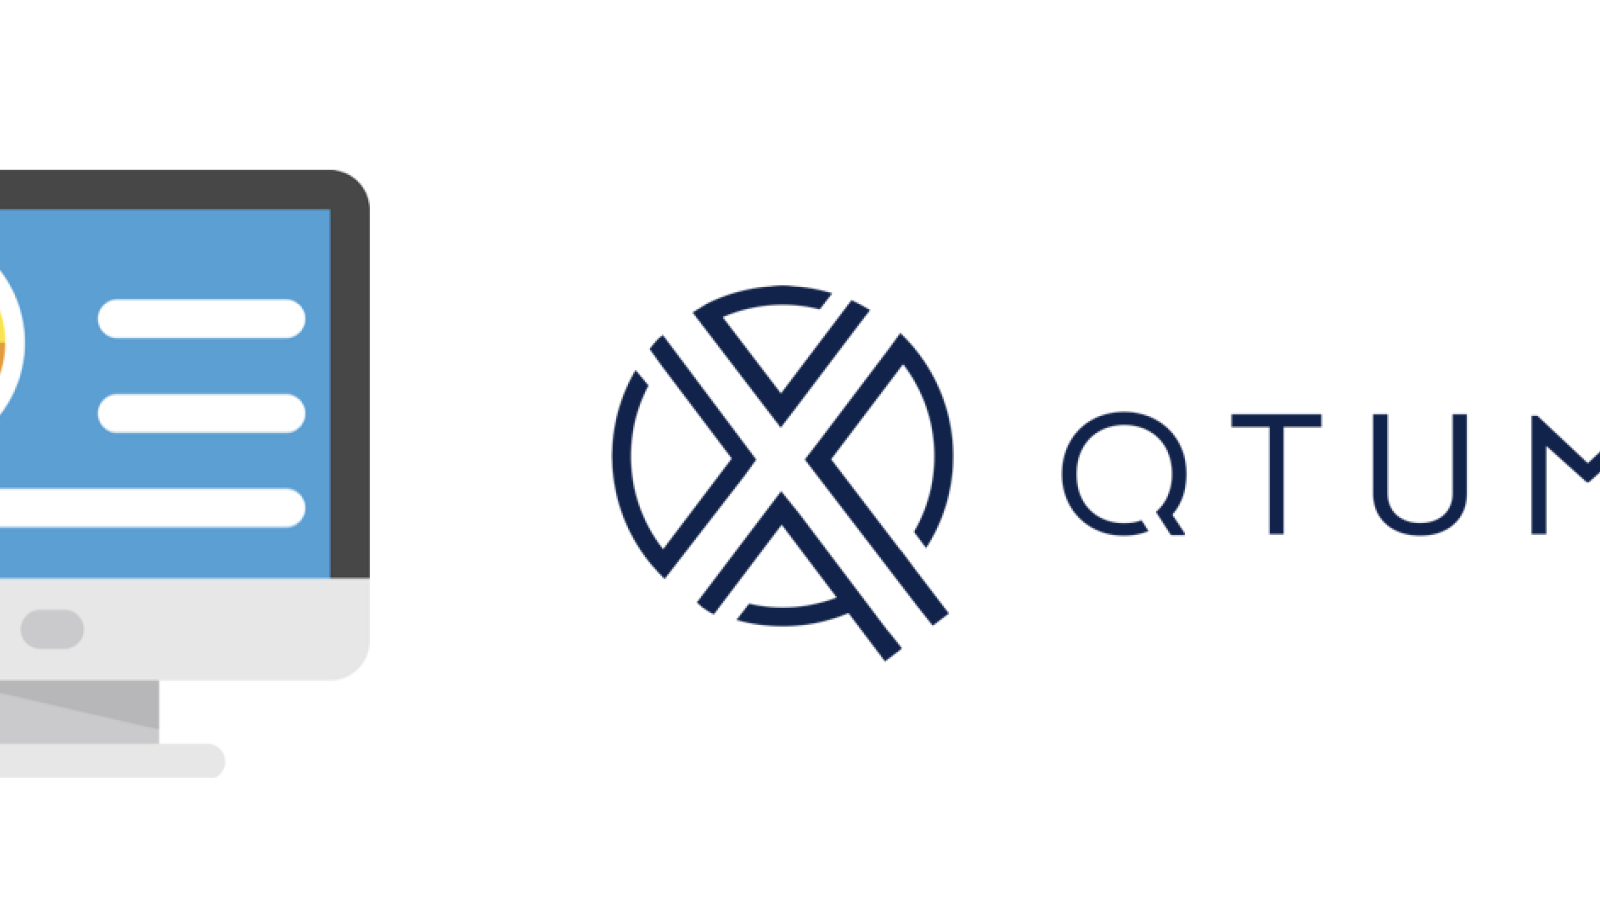 QtumX Achieves 10,000 TPS in Benchmark Tests